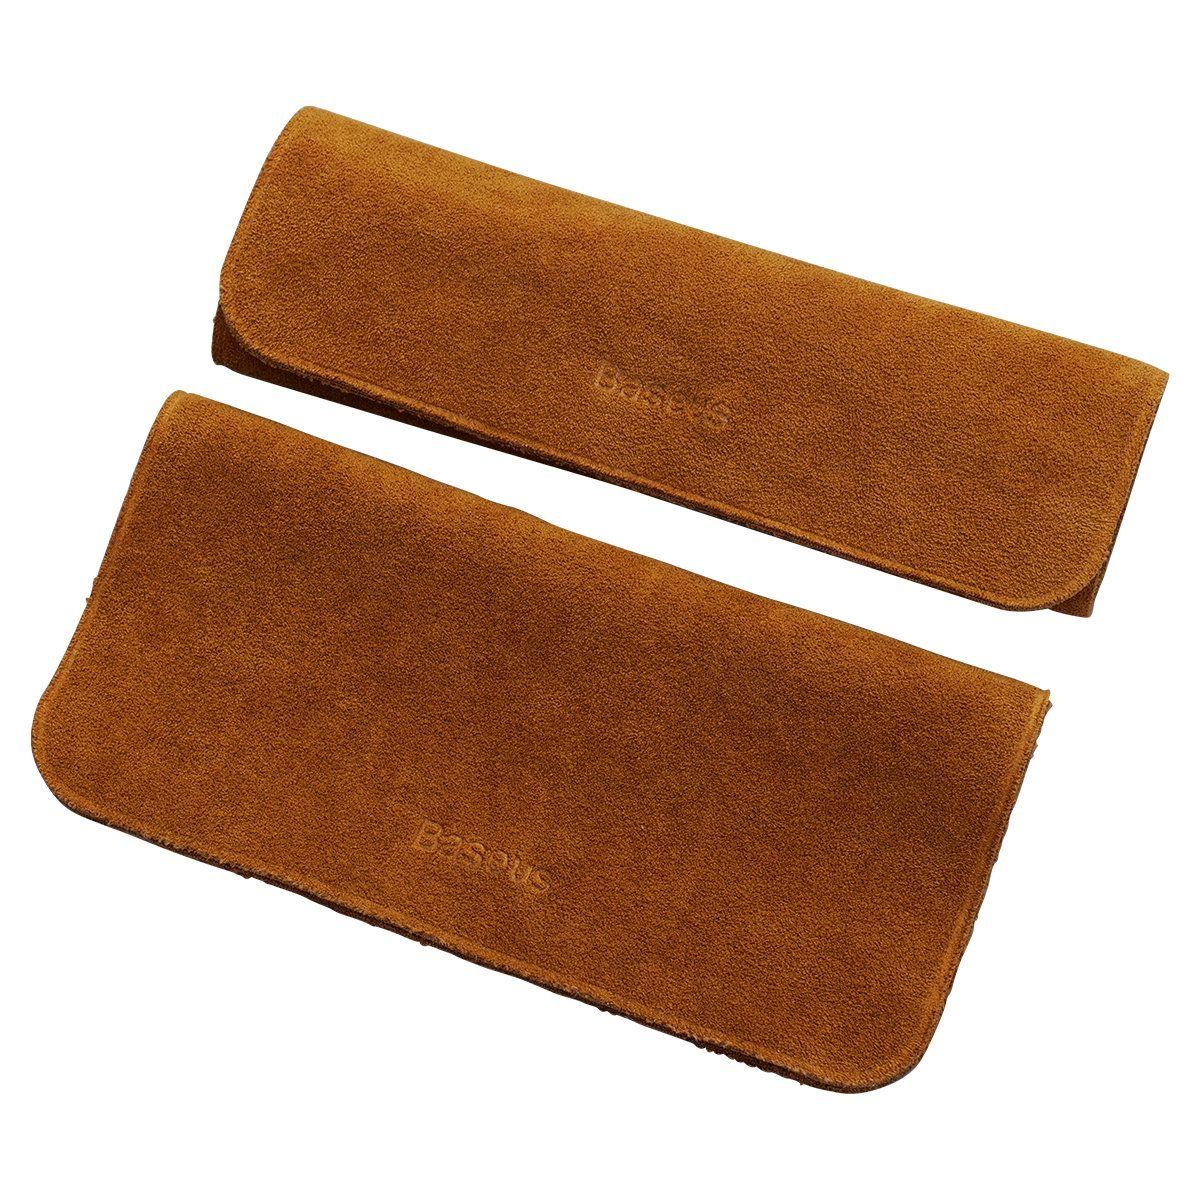 Baseus Auto-care screen cleaning cloths 2 pcs gray and brown (CRYH010019)